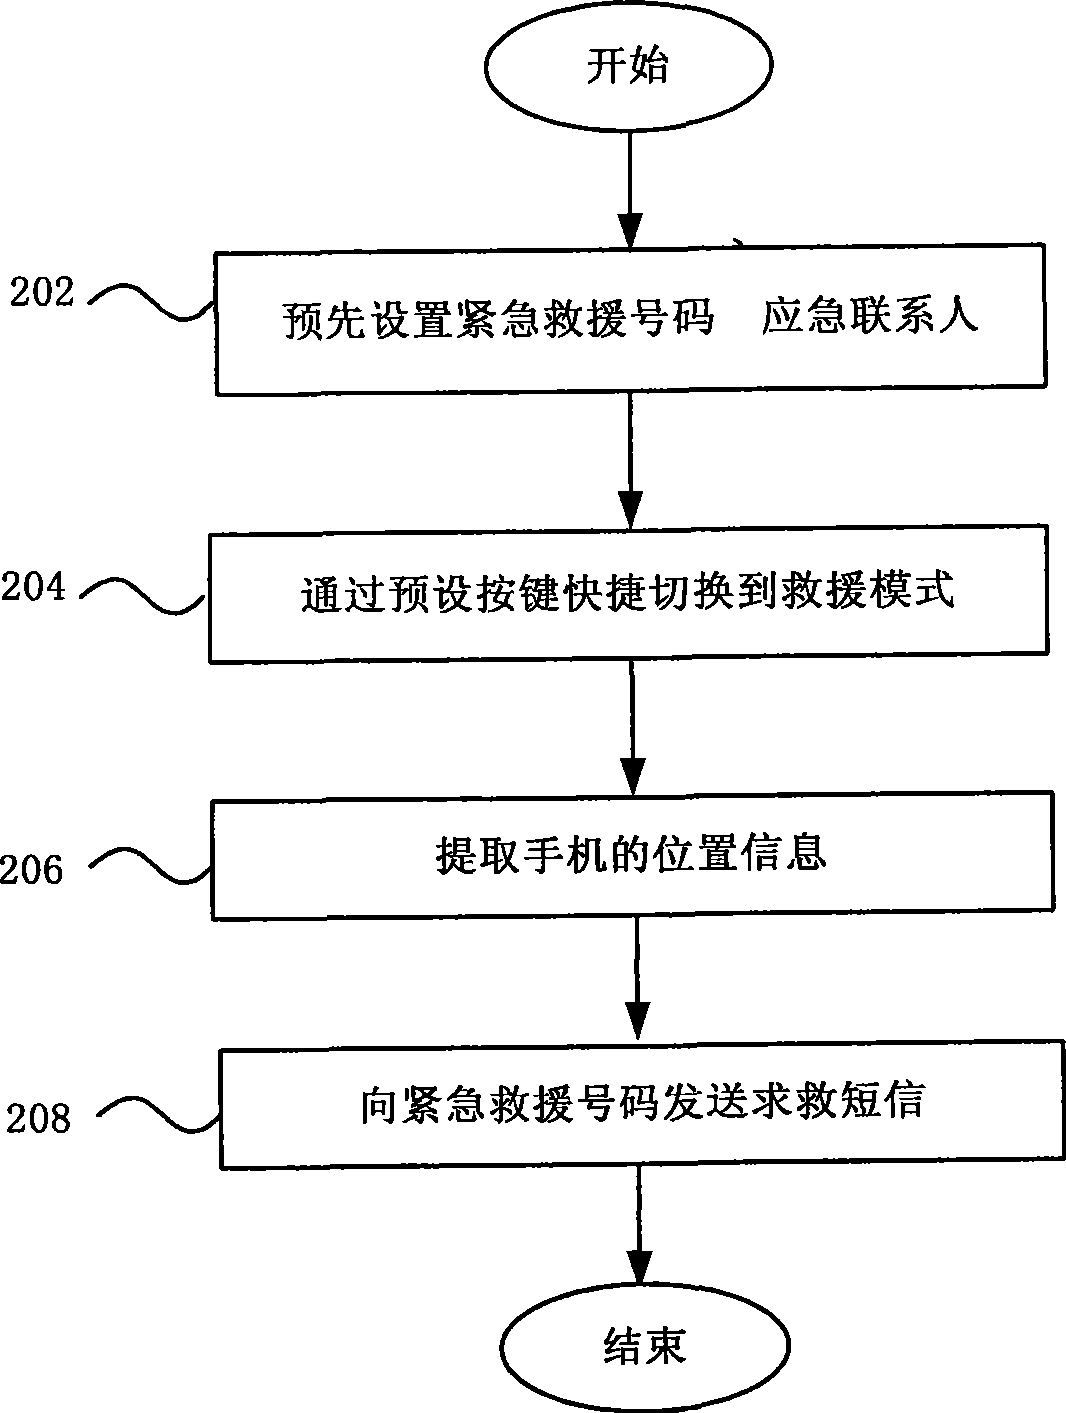 Method for sending SOS information by mobile terminal, and mobile terminal thereof